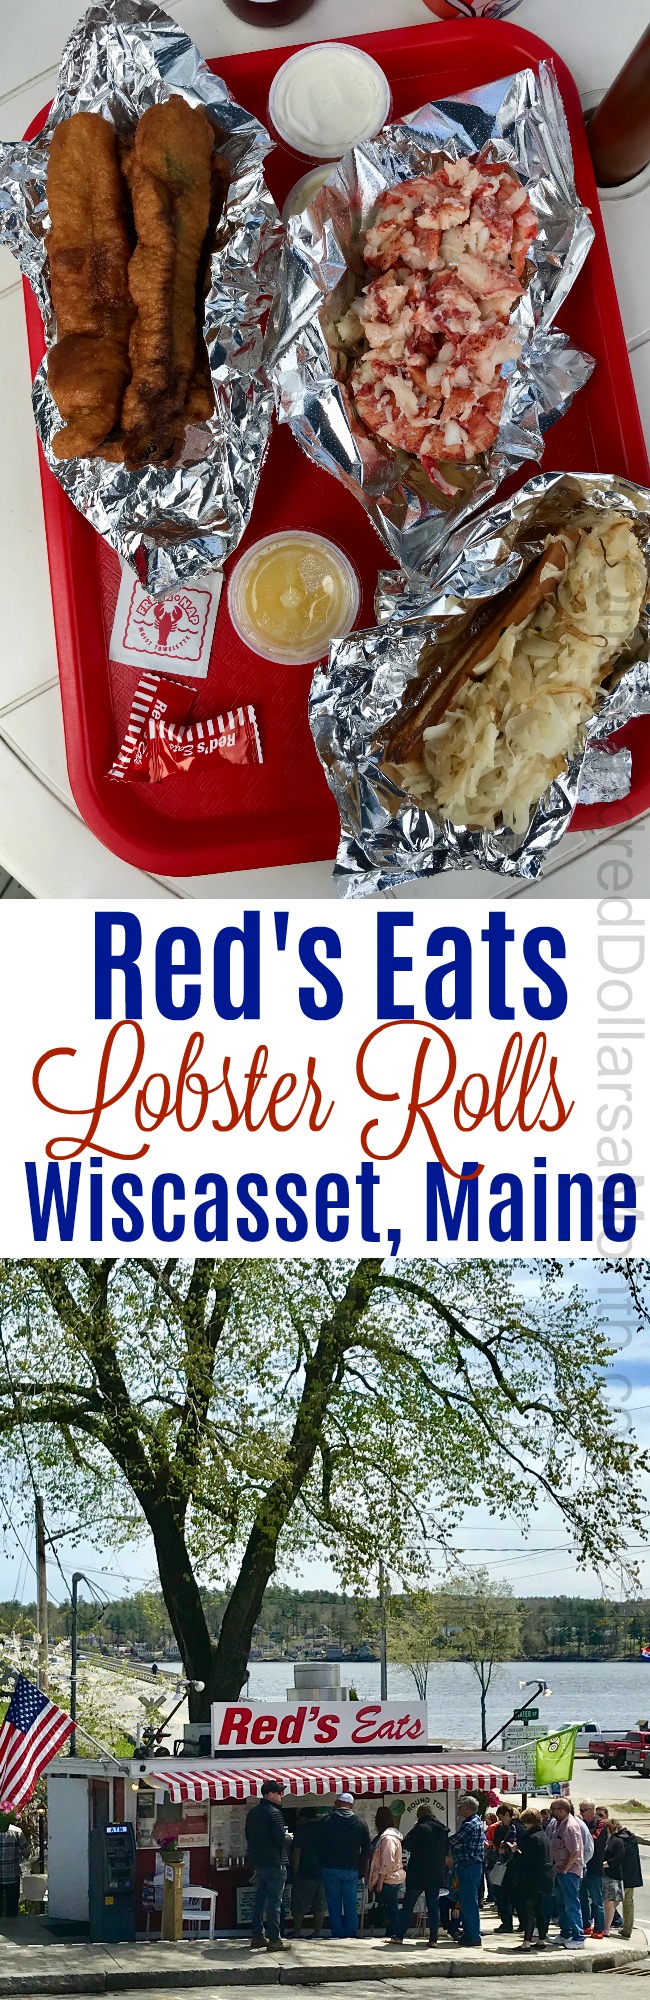 Red’s Eats in Wiscasset, Maine